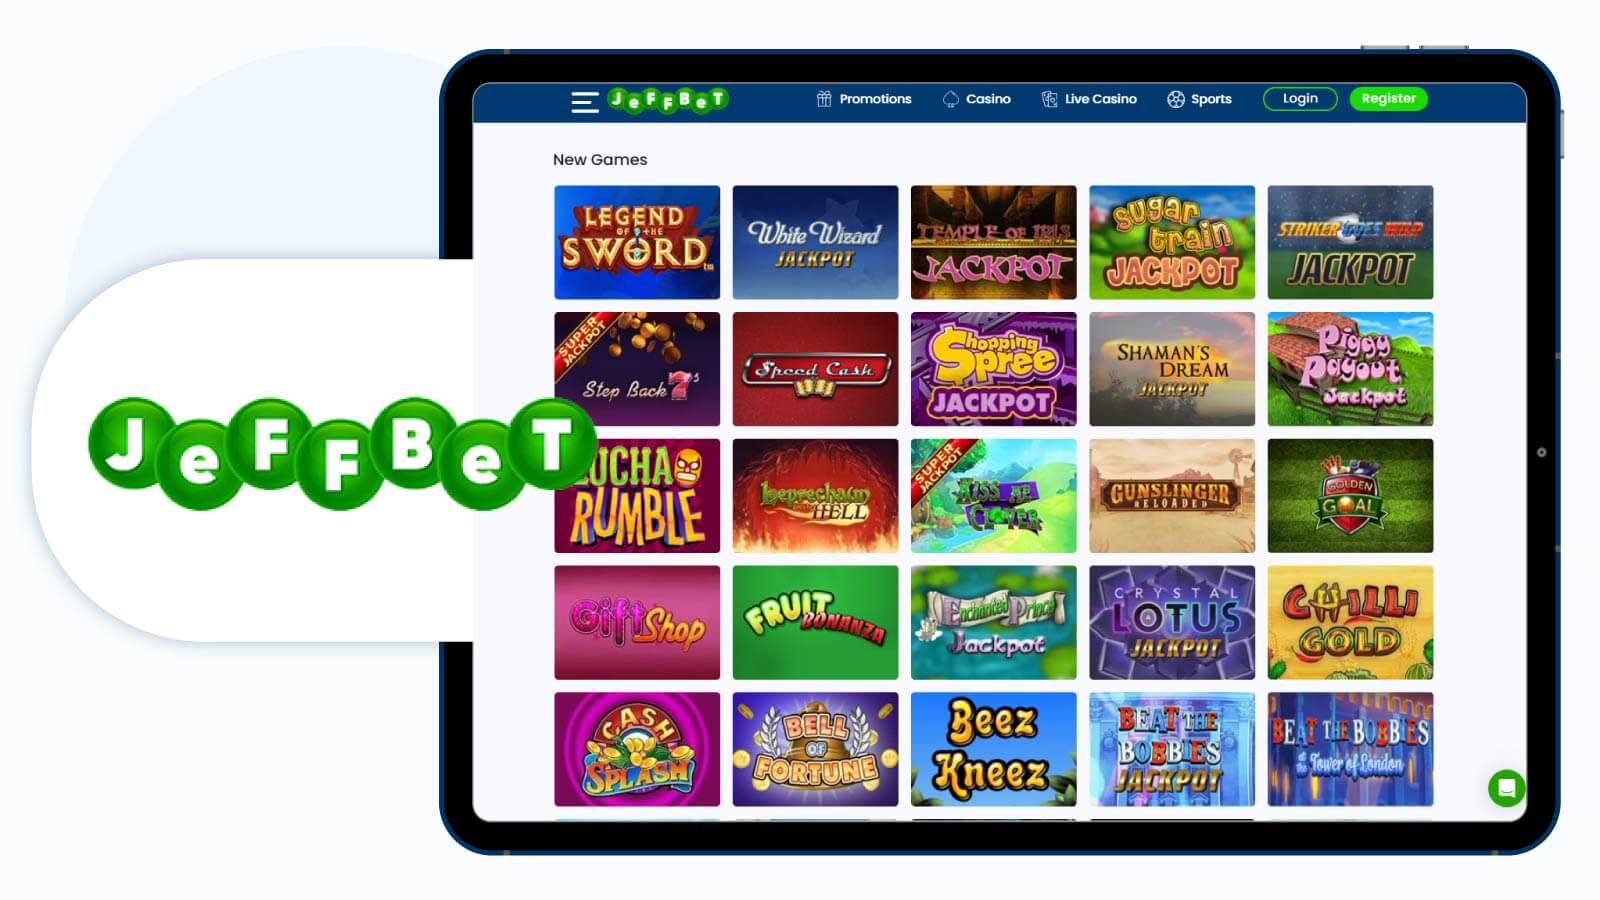 JeffBet Casino – Casino with Lowest PayPal Minimum Withdrawal